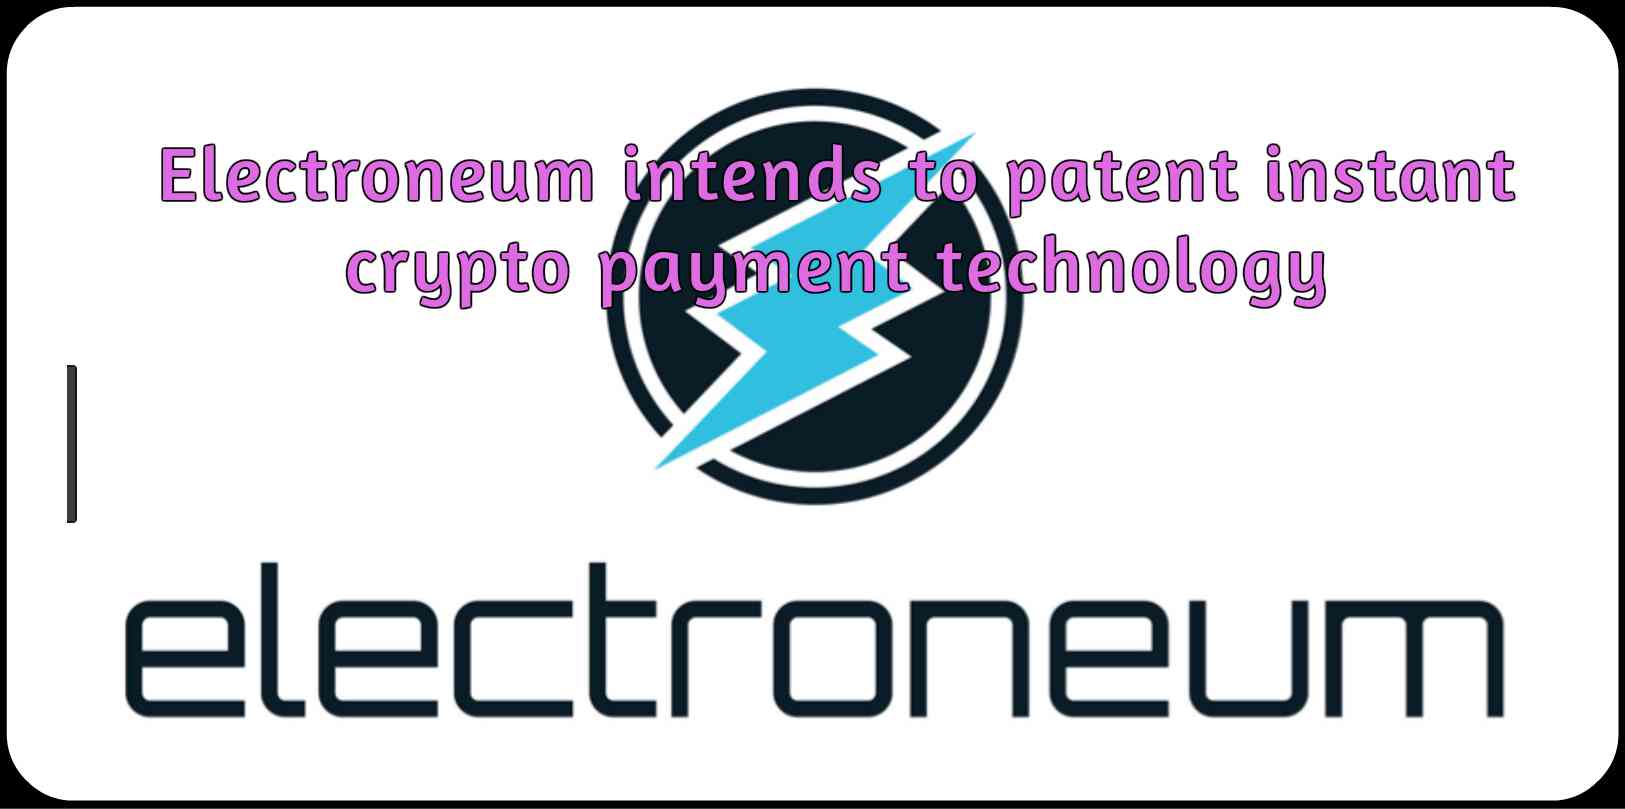 CRYPTONEWSBYTES.COM Electroneum-intends-to-patent-instant-crypto-payment-technology Electroneum intends to patent instant crypto payment technology  